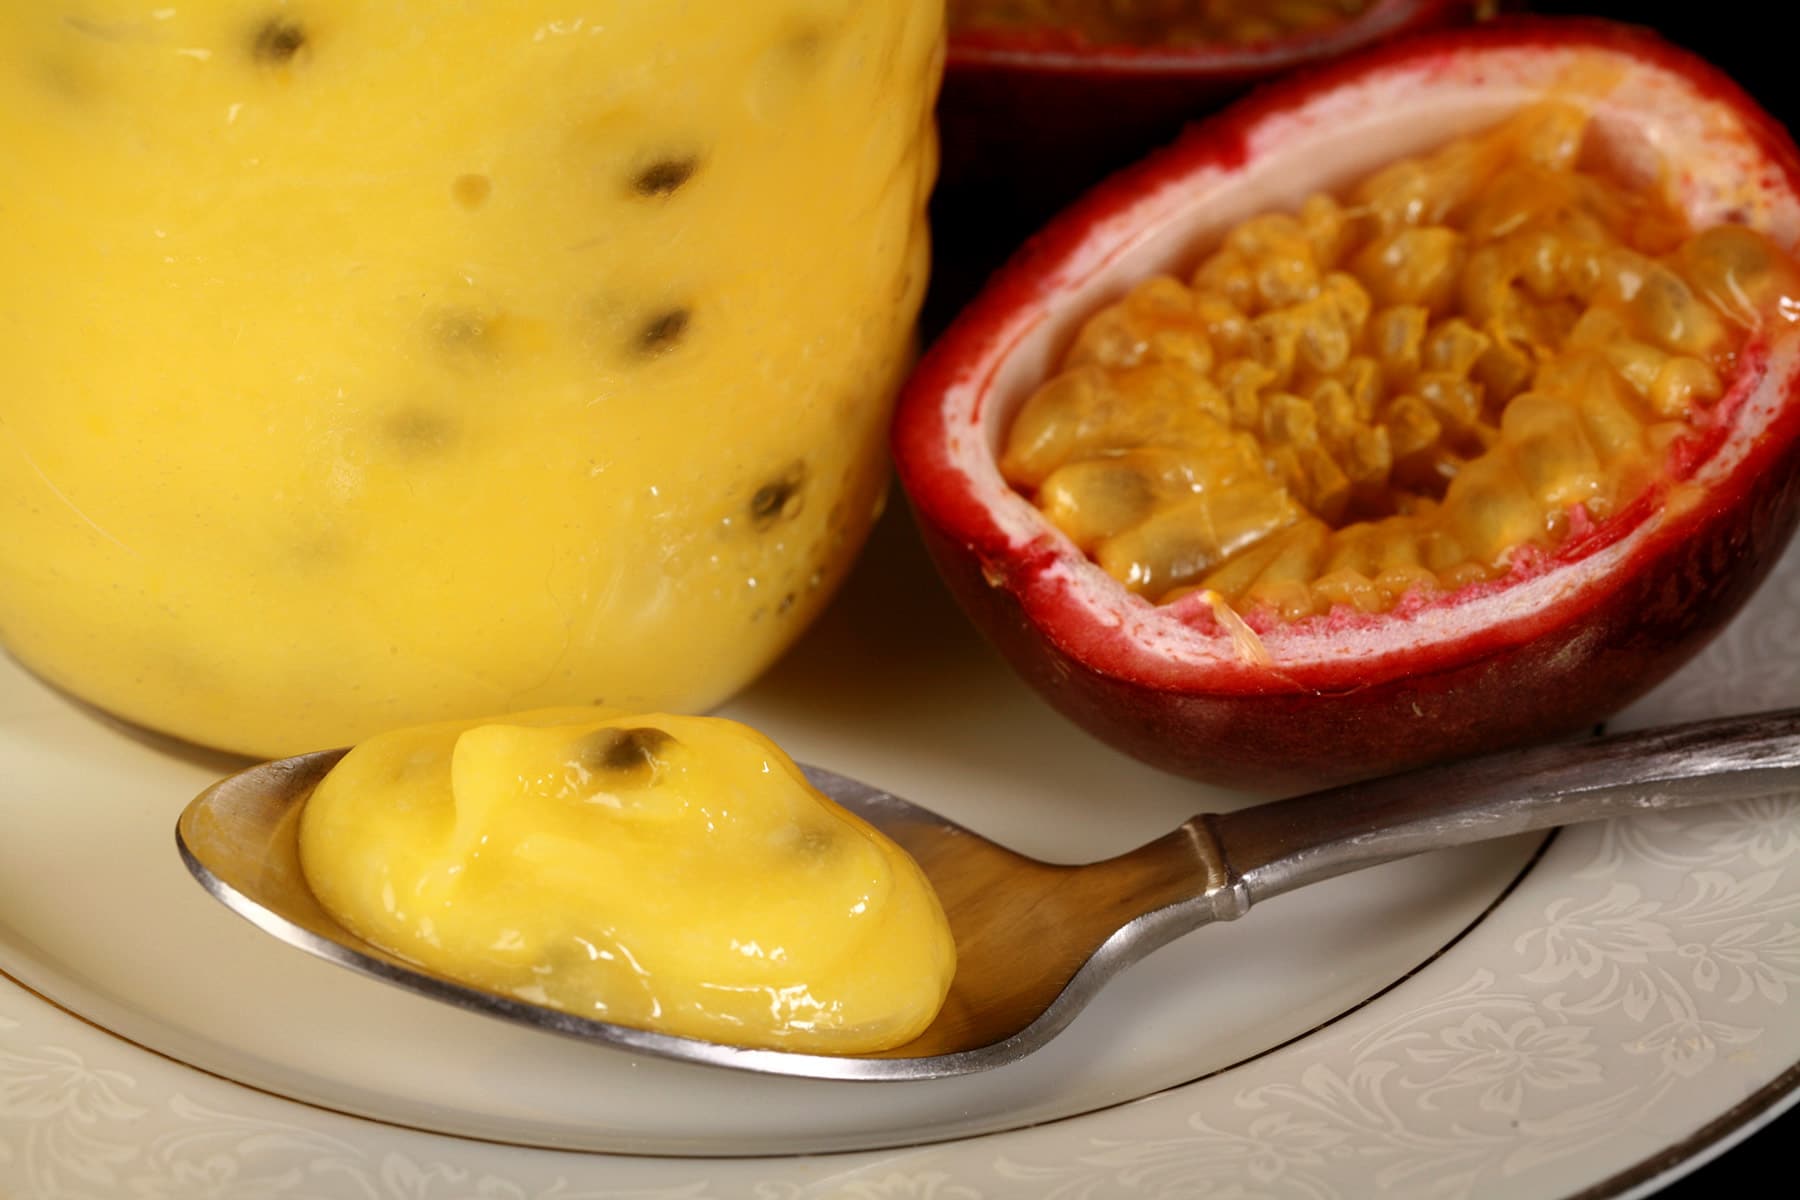 A jar of passionfruit curd on a plate, along with a spoon of curd and a sliced passionfruit.